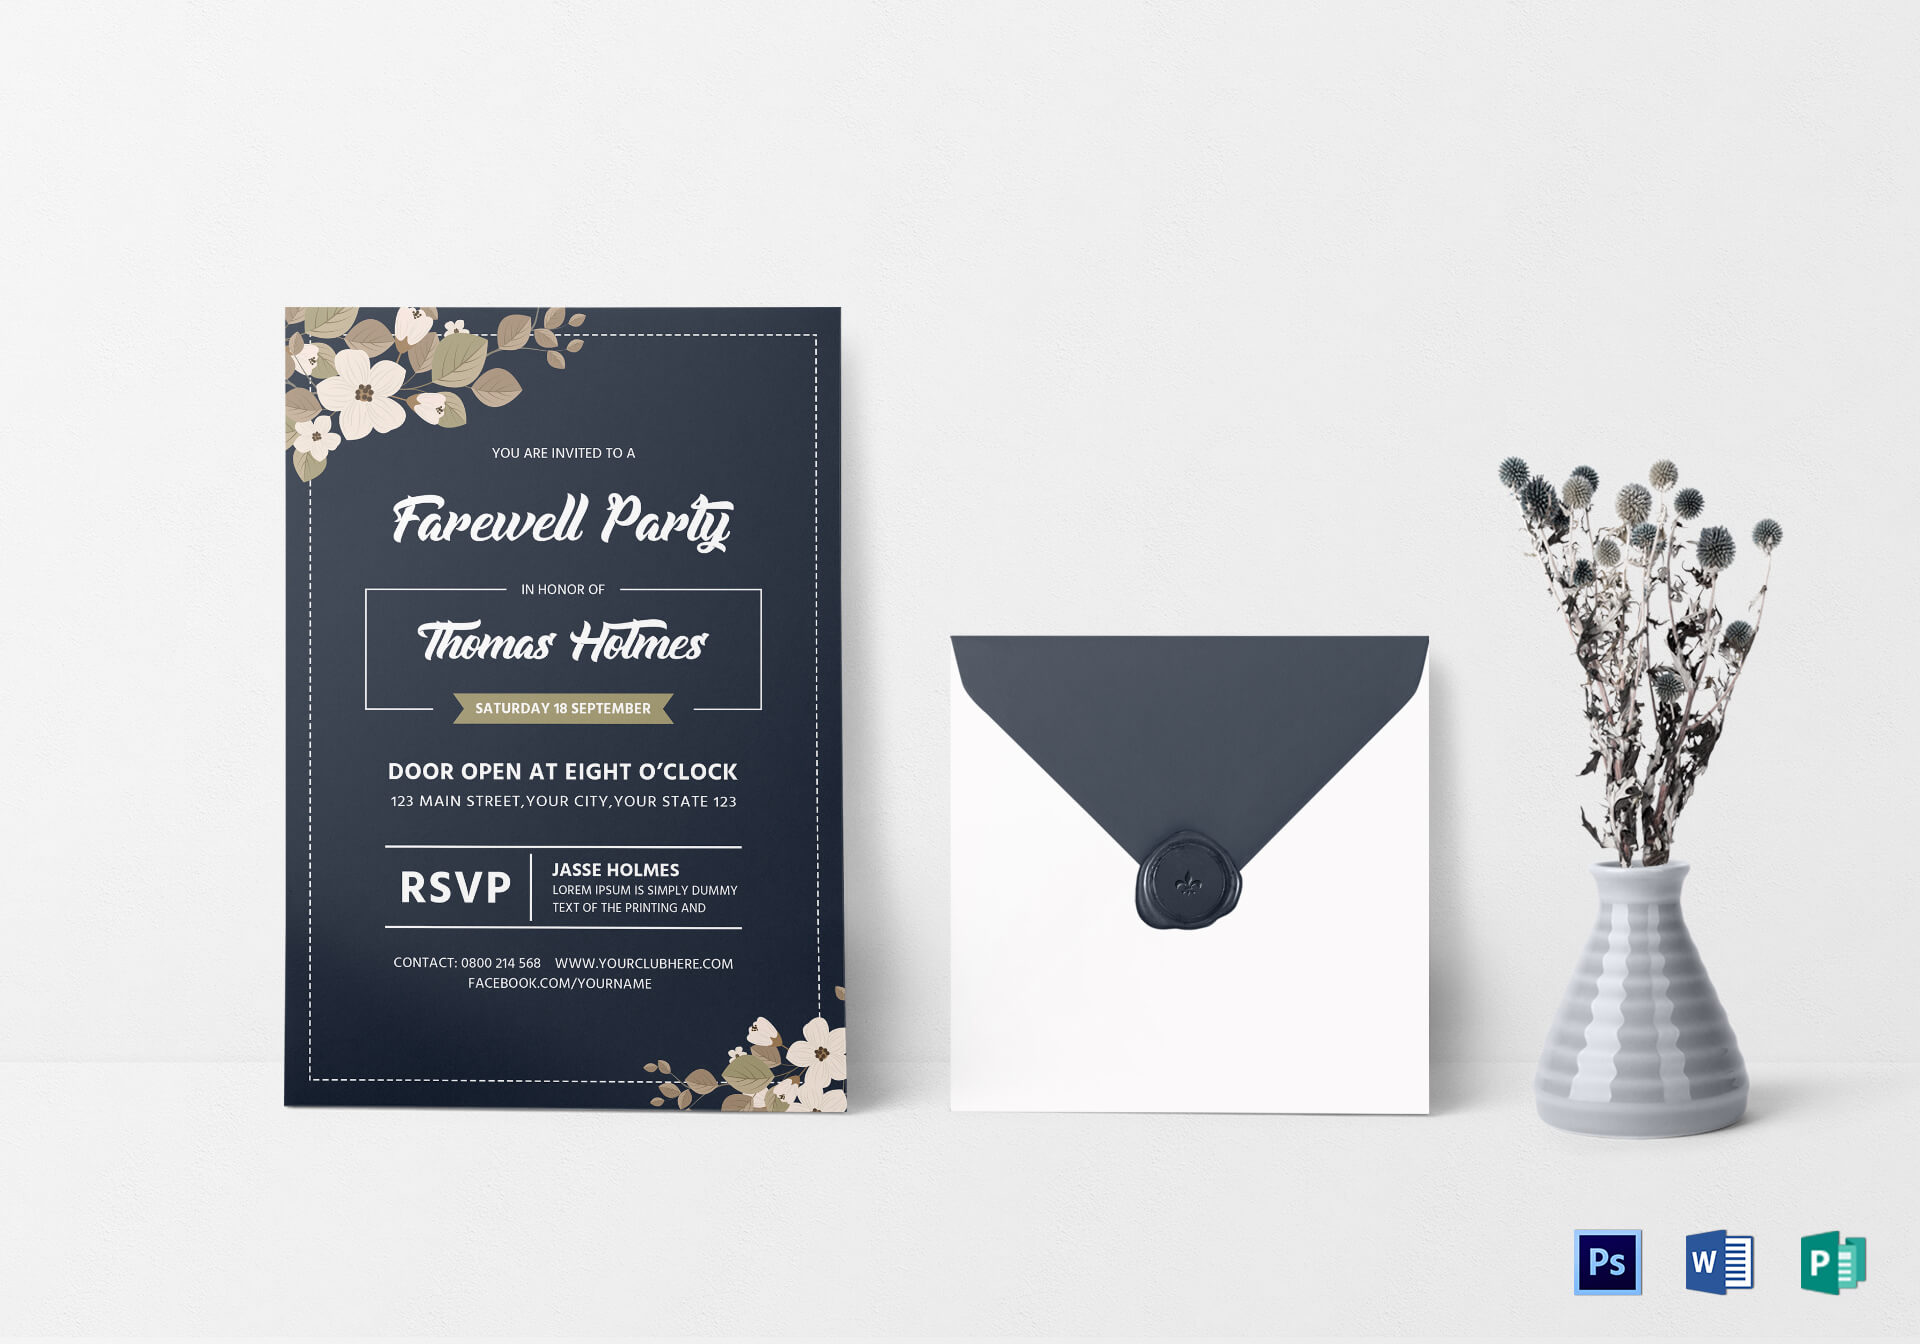 Farewell Party Invitation Card Template Throughout Farewell Invitation Card Template